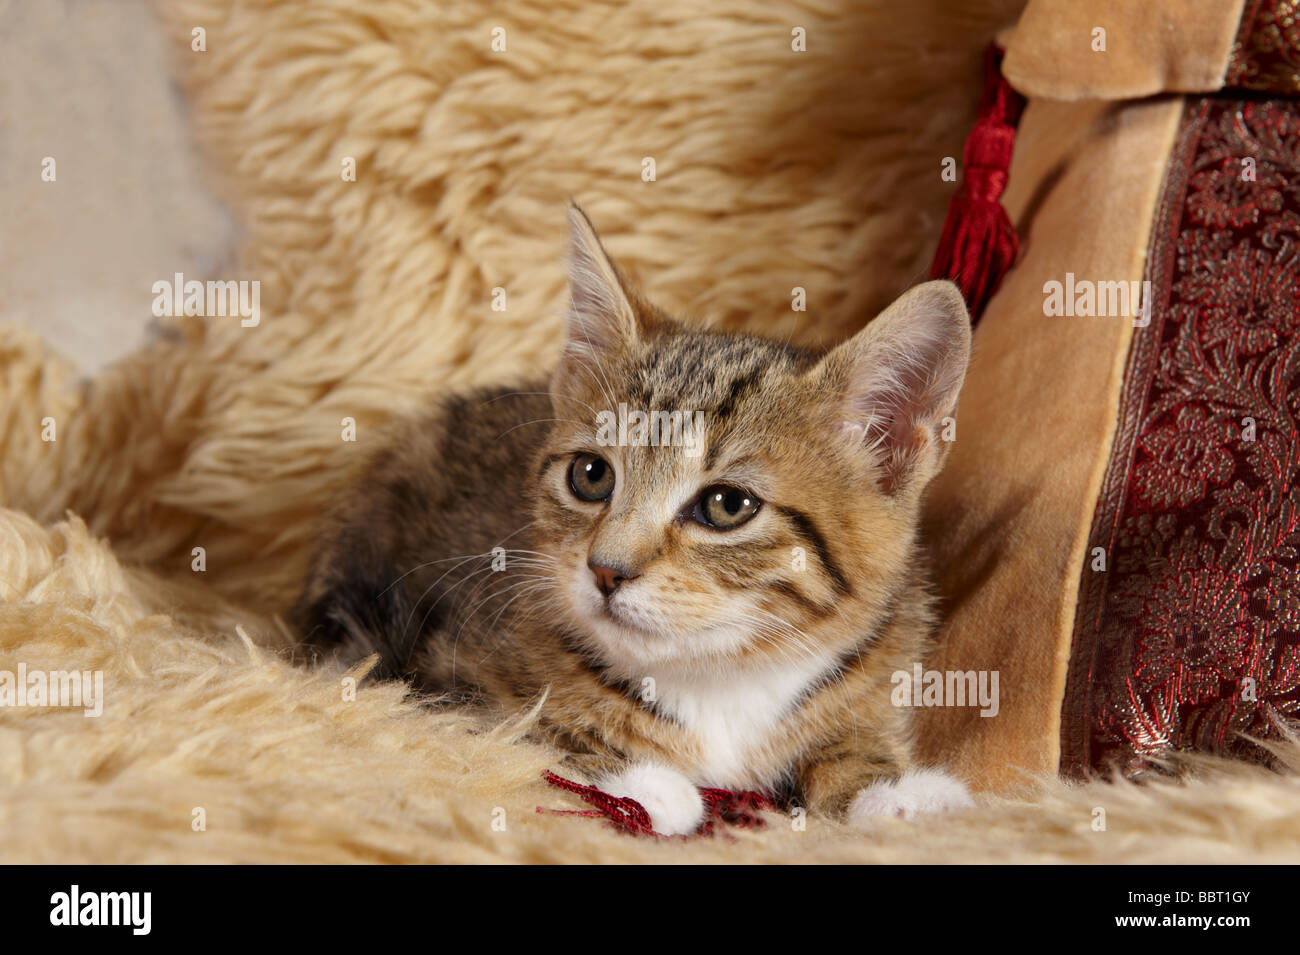 Young tabby kitten crouching lying down looking inquisitive Stock Photo